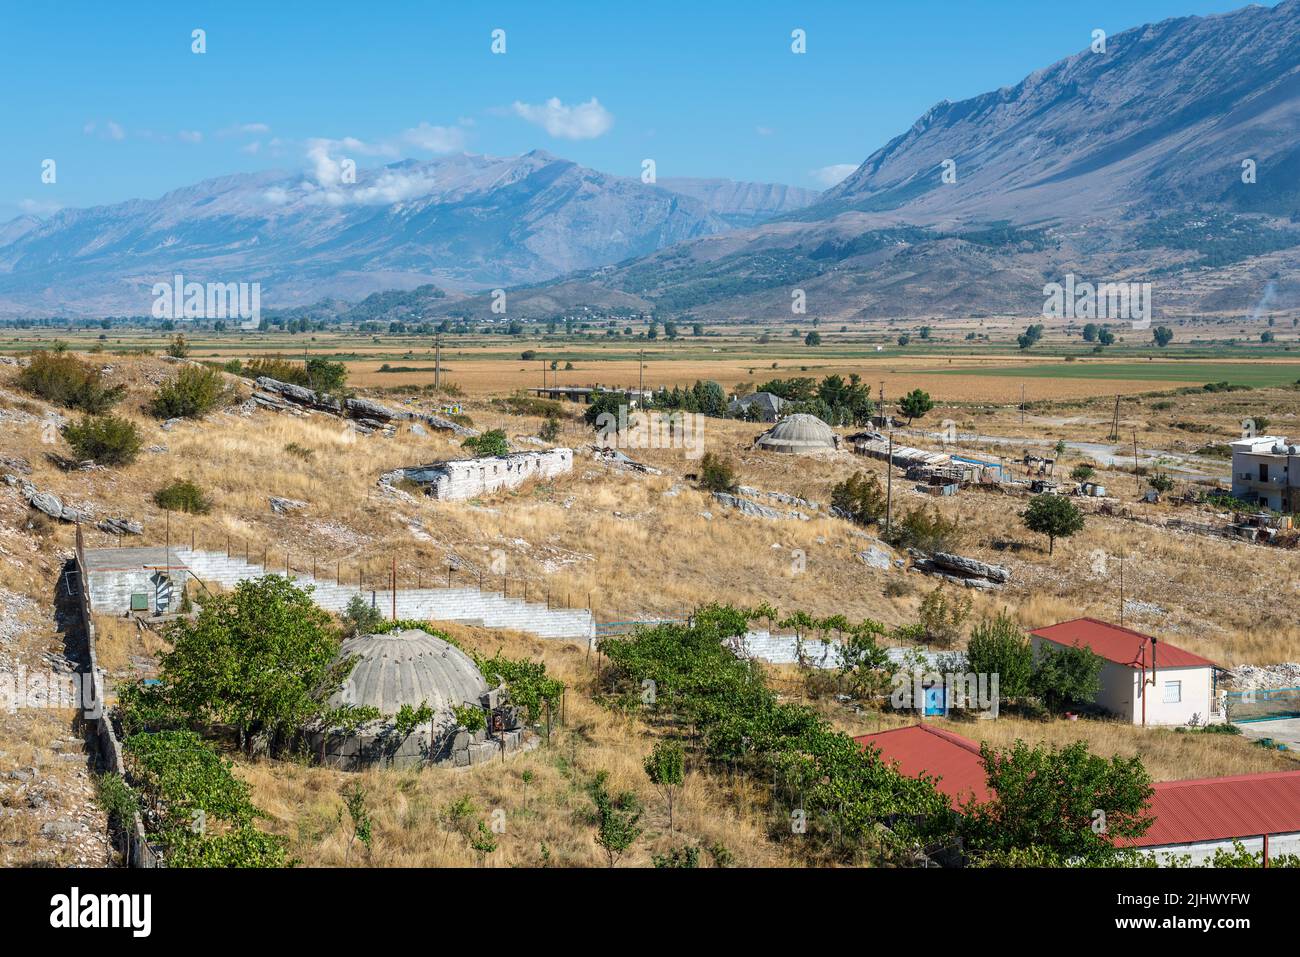 Jorgucat, Albania - September 10, 2021: Landscape with concrete military bunkers in Albania. The bunkers were built by during the cold war by the comm Stock Photo